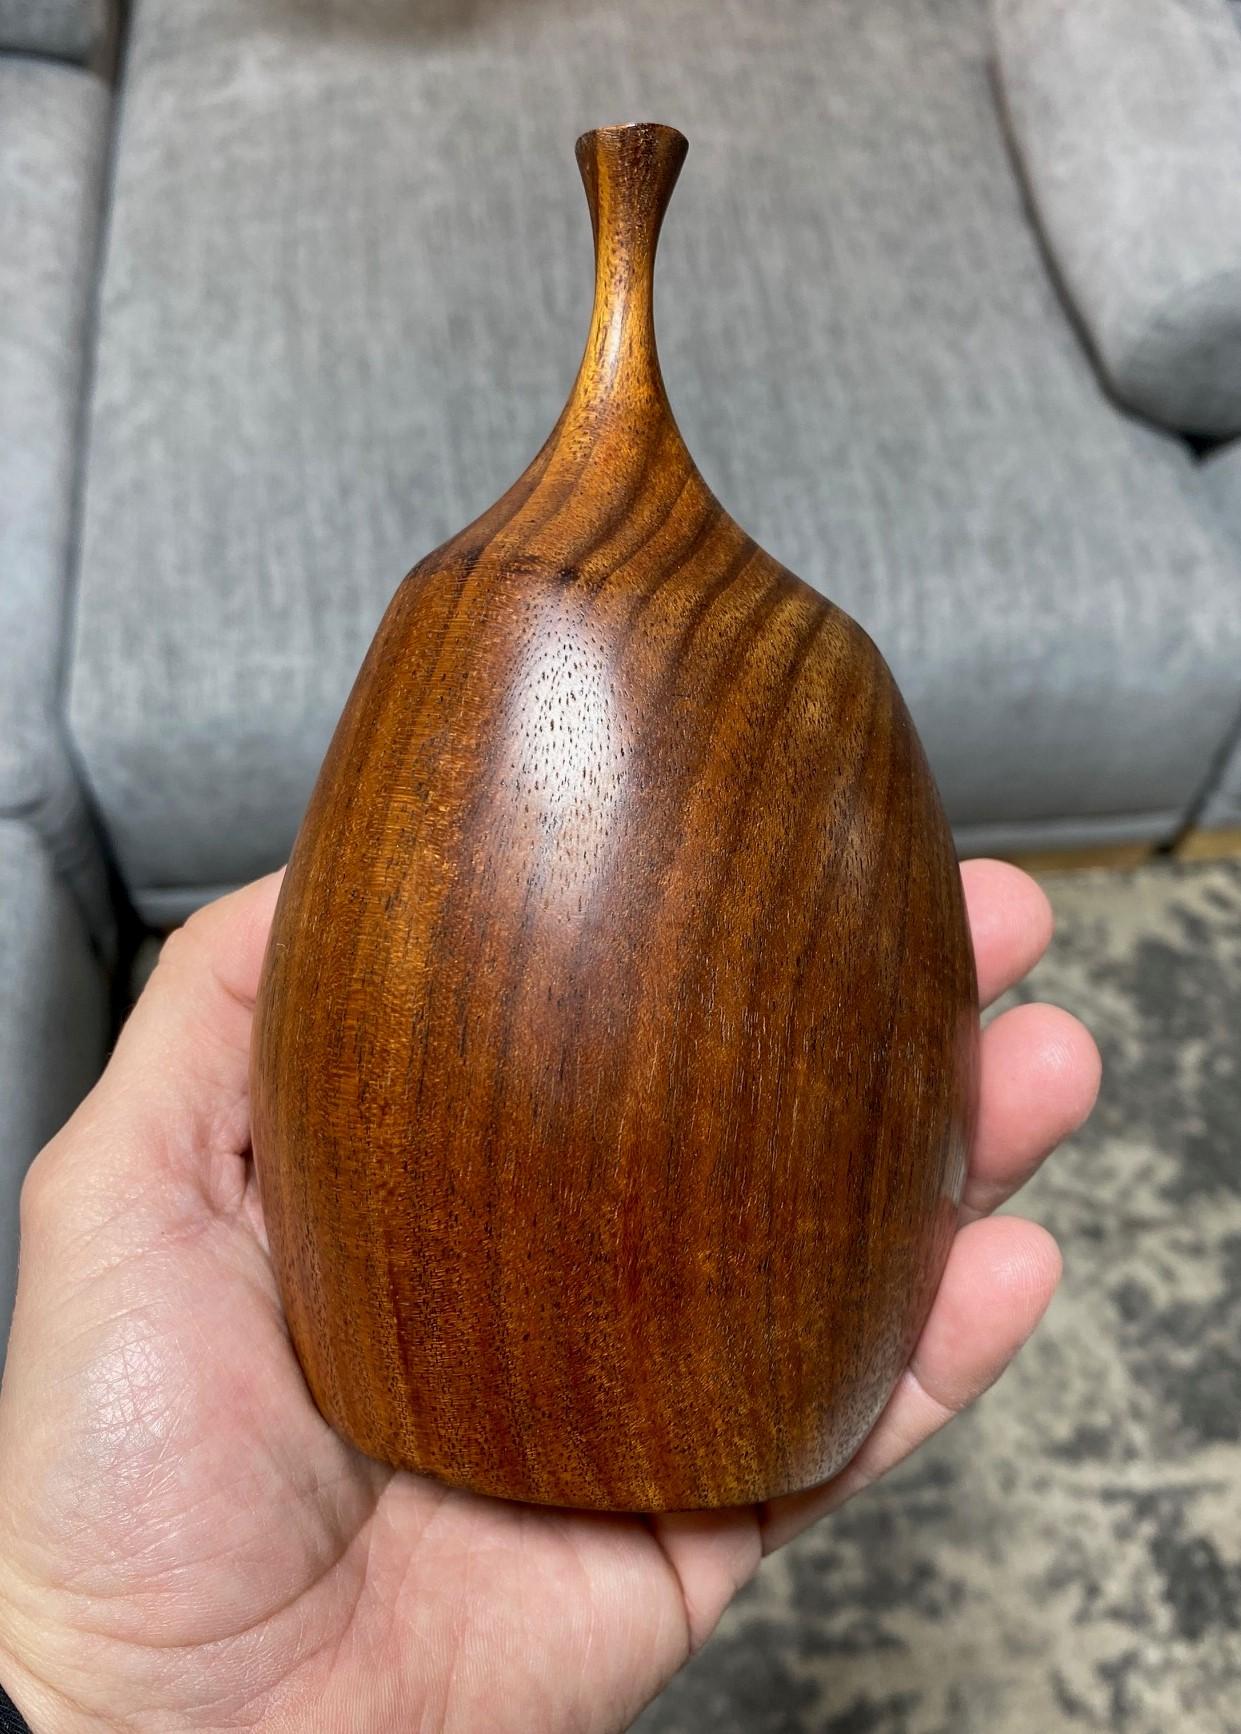 Doug Ayers Signed California Artist Organic Natural Wood Turned Weed Vase Vessel For Sale 7